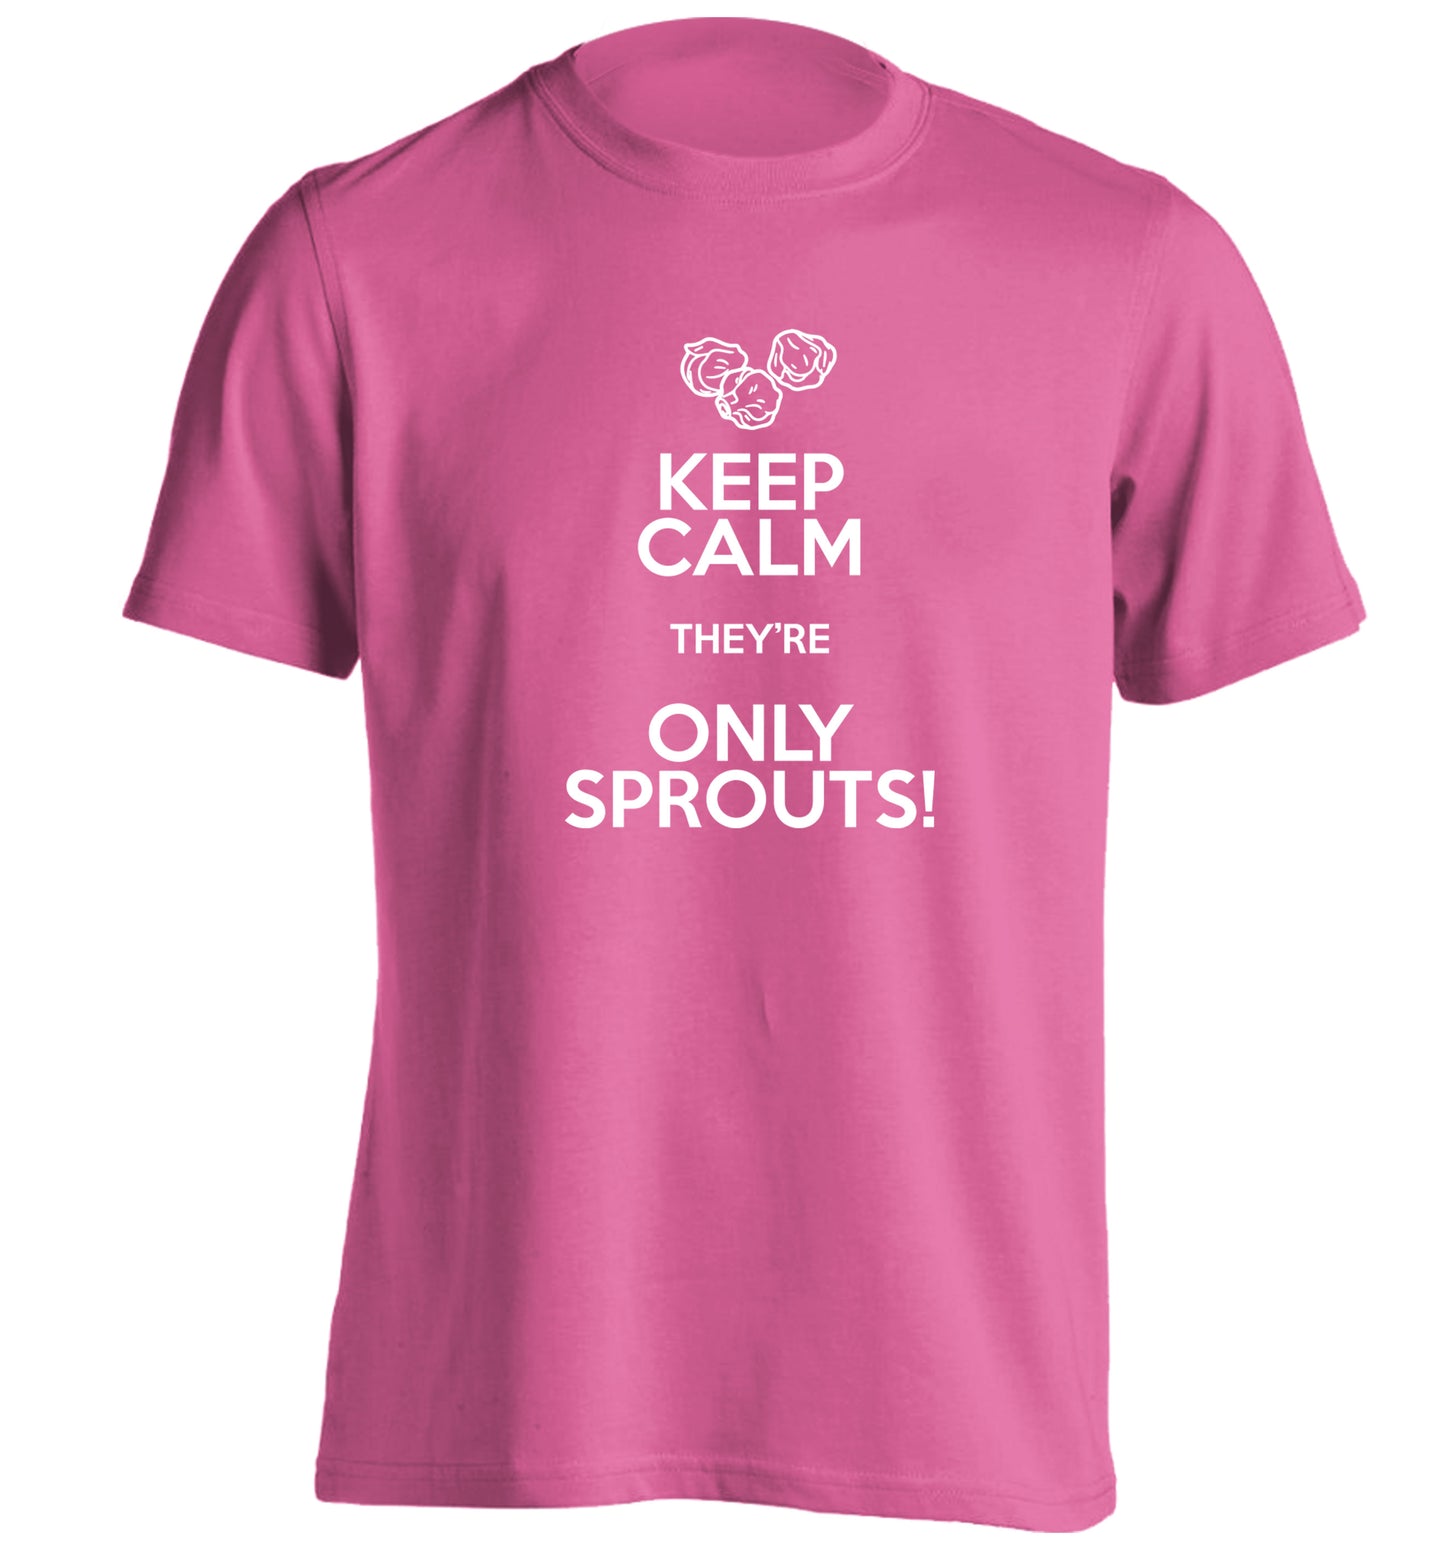 Keep calm they're only sprouts adults unisex pink Tshirt 2XL